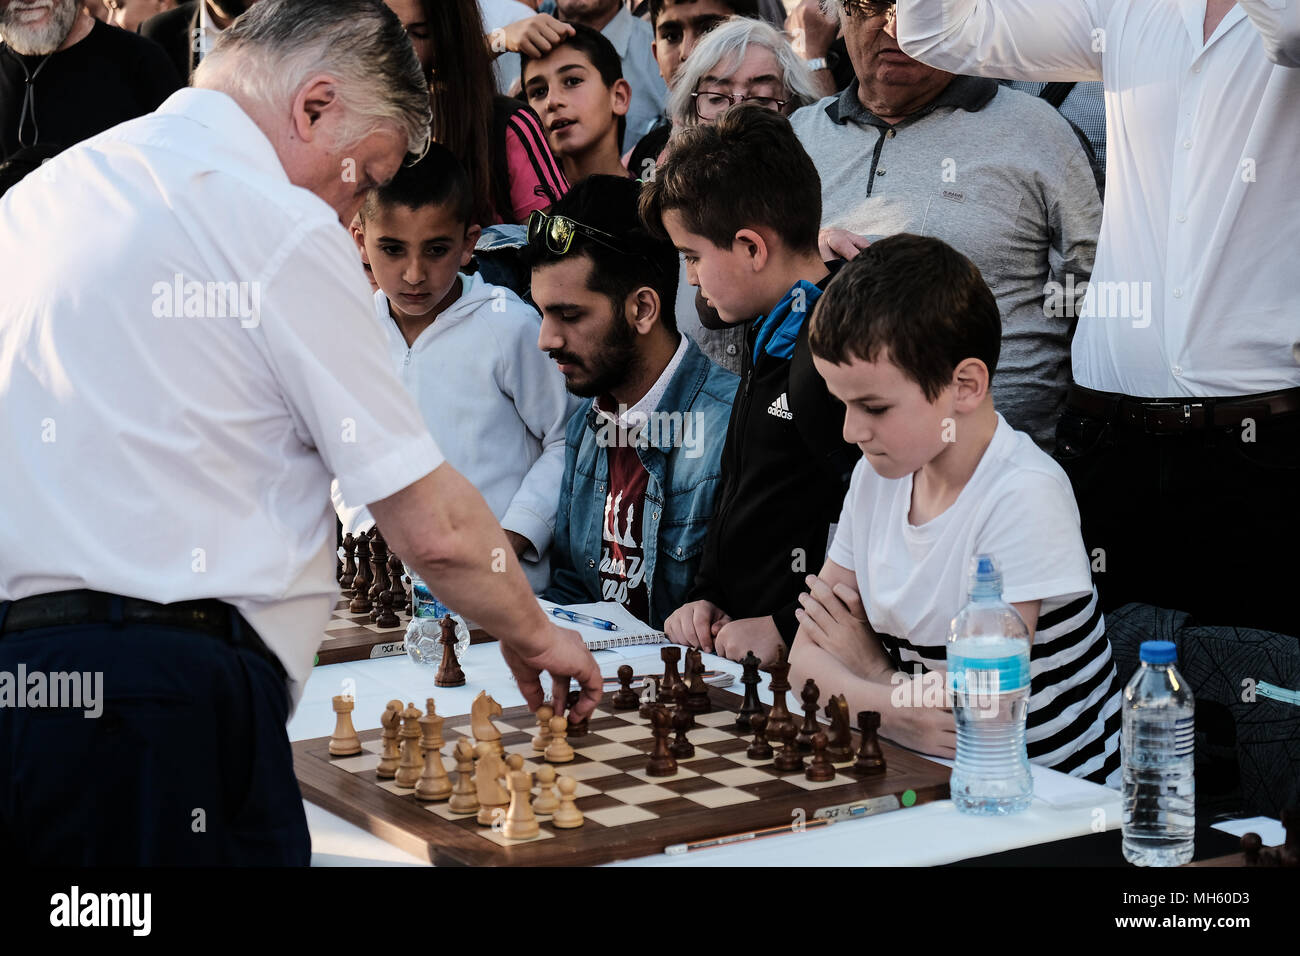 Jerusalem, Israel. 30th April, 2018. ANATOLY YEVGENYEVICH KARPOV (R), 66, Russian chess grandmaster, plays chess against dozens of Israeli youth champions simultaneously at the Jaffa Gate in the framework of Israel's 70th Independence Day celebrations. Credit: Nir Alon/Alamy Live News Stock Photo